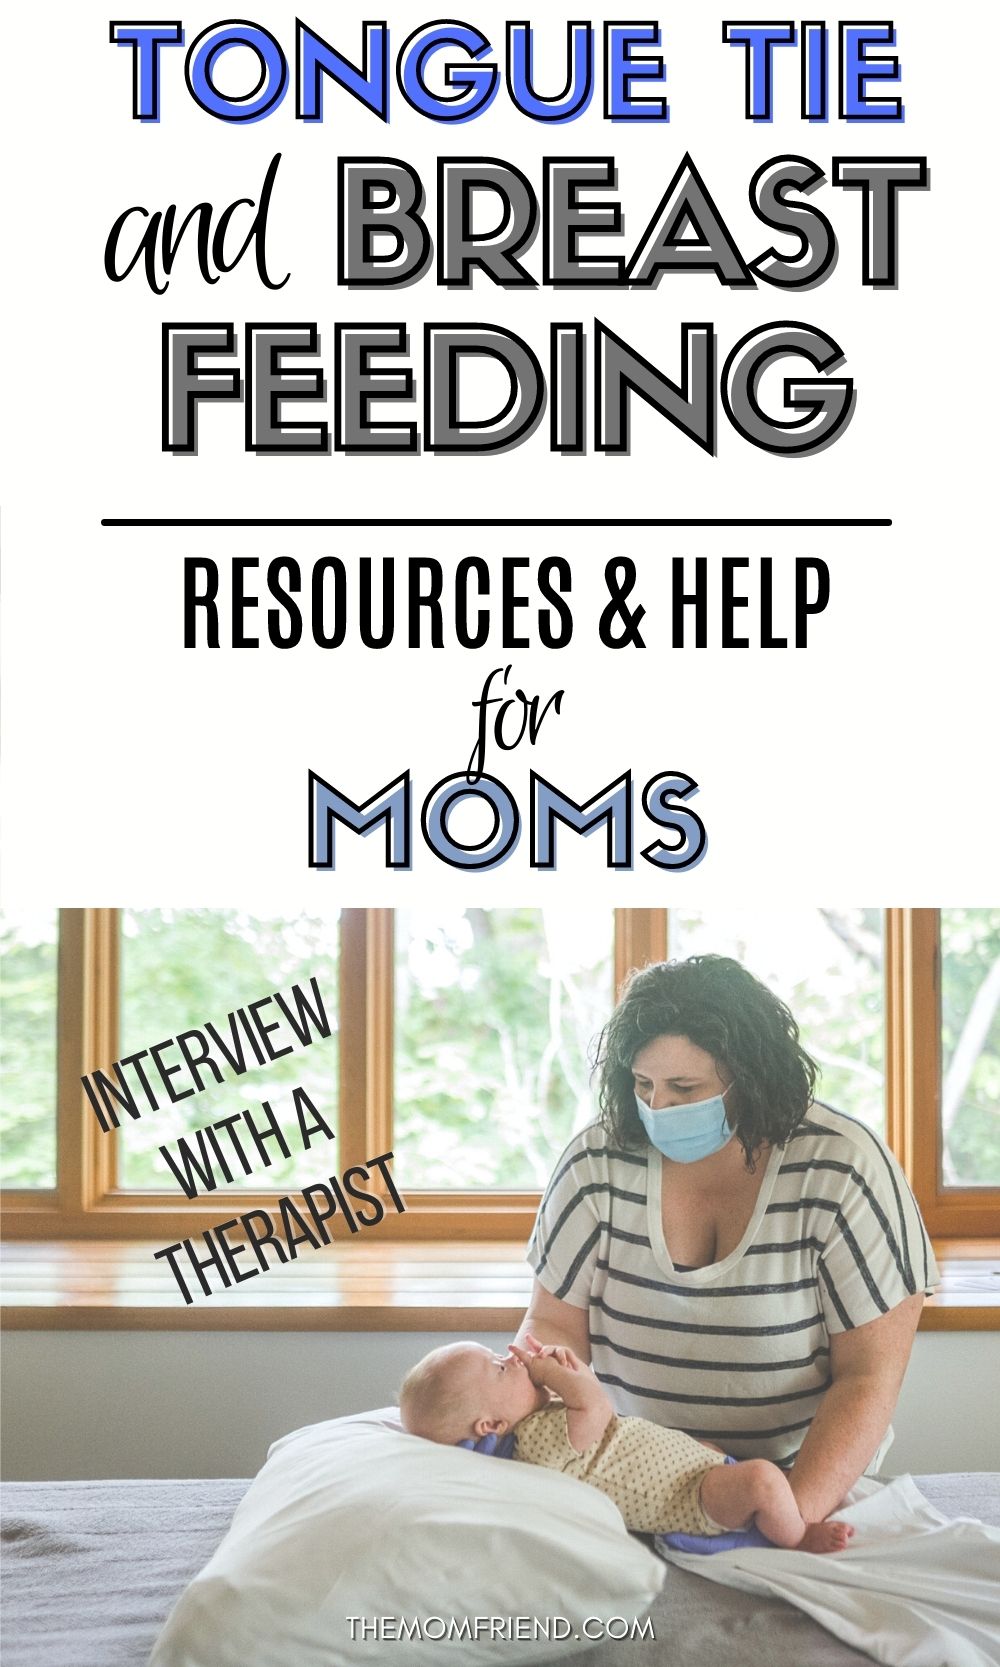 Pinterest image with text: Tongue tie and breast feeding - resources and help for moms